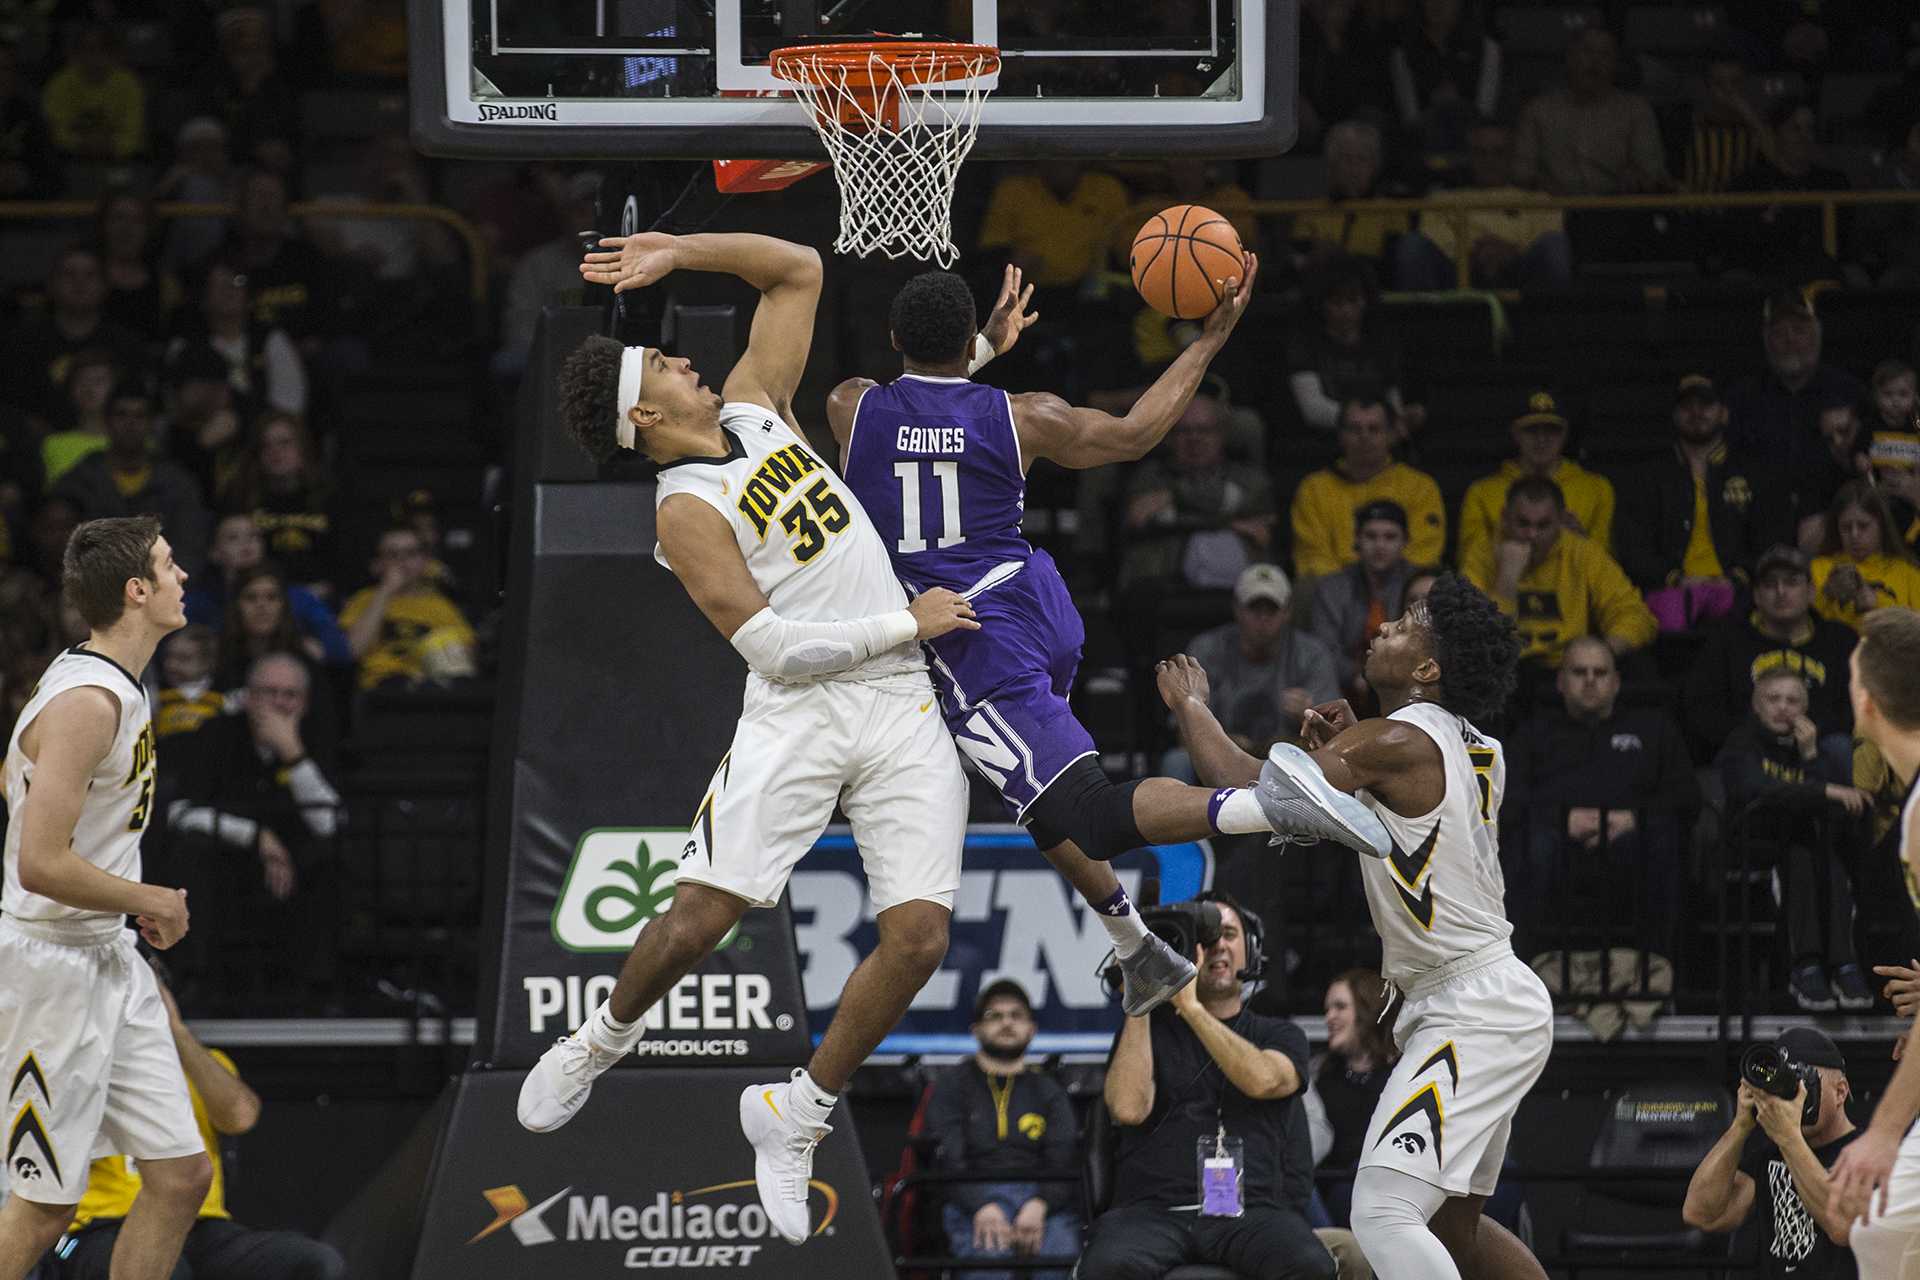 Iowas Cordell Pemsl (35) attempts to block a shot by Northwesterns Anthony Gaines (11) during the Senior Day mens basketball game between Iowa and Northwestern at Carver-Hawkeye Arena on Sunday, Feb. 25, 2018. The Hawkeyes defeated the Wildcats 77-70. (Ben Allan Smith/The Daily Iowan)